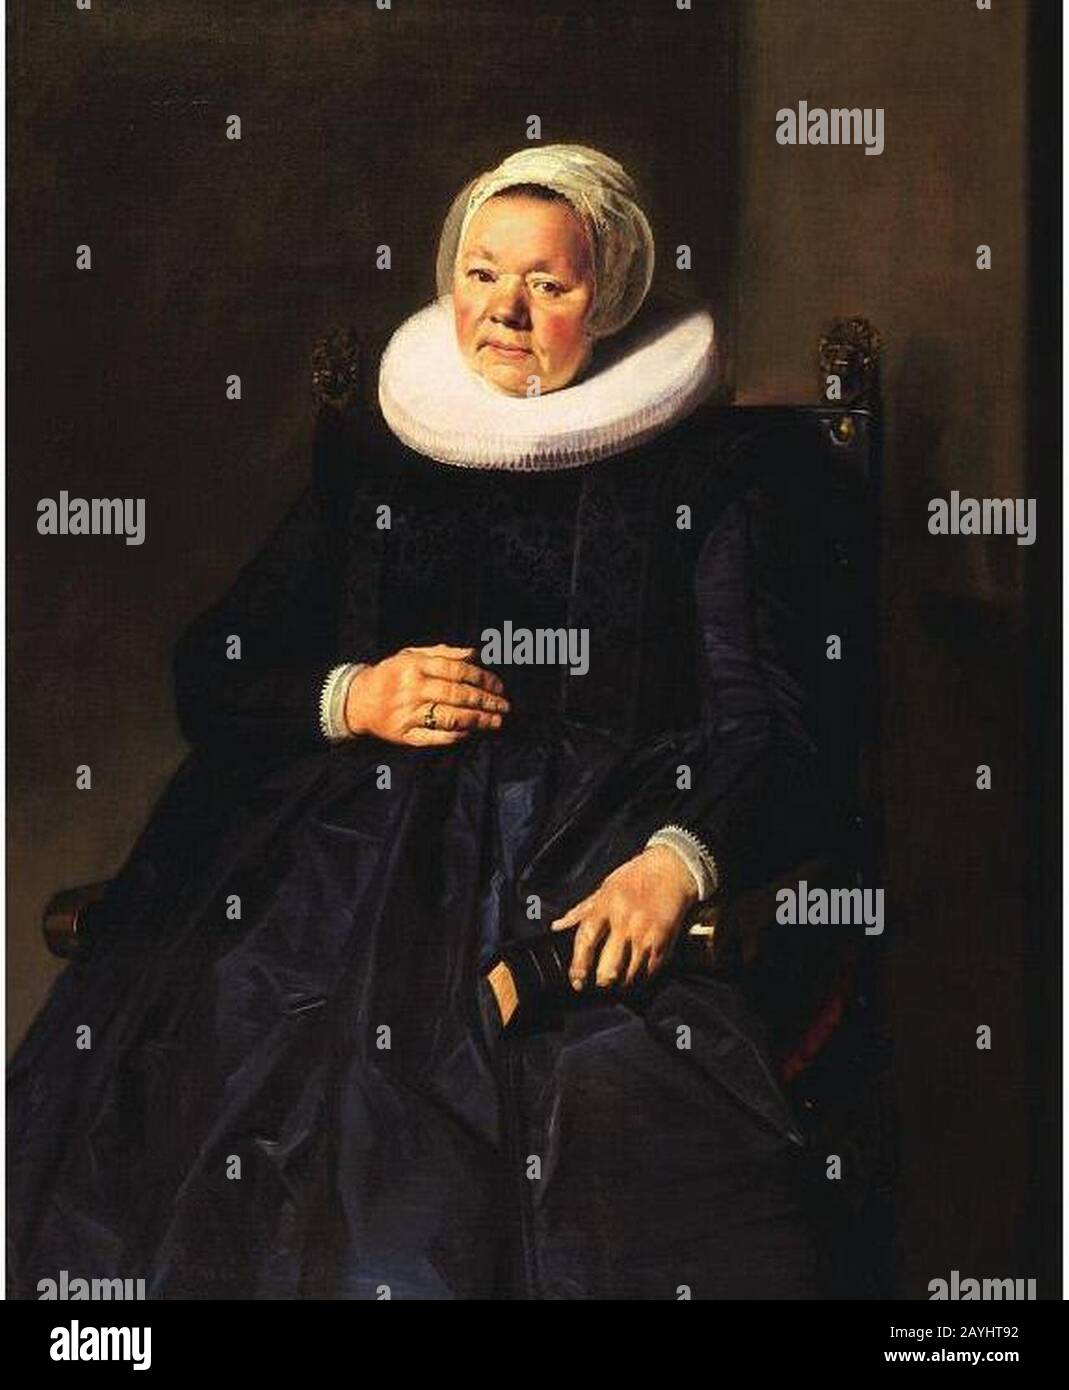 Frans Hals - Portrait of a woman in 1635 - Frick 1910.1.72. Stock Photo